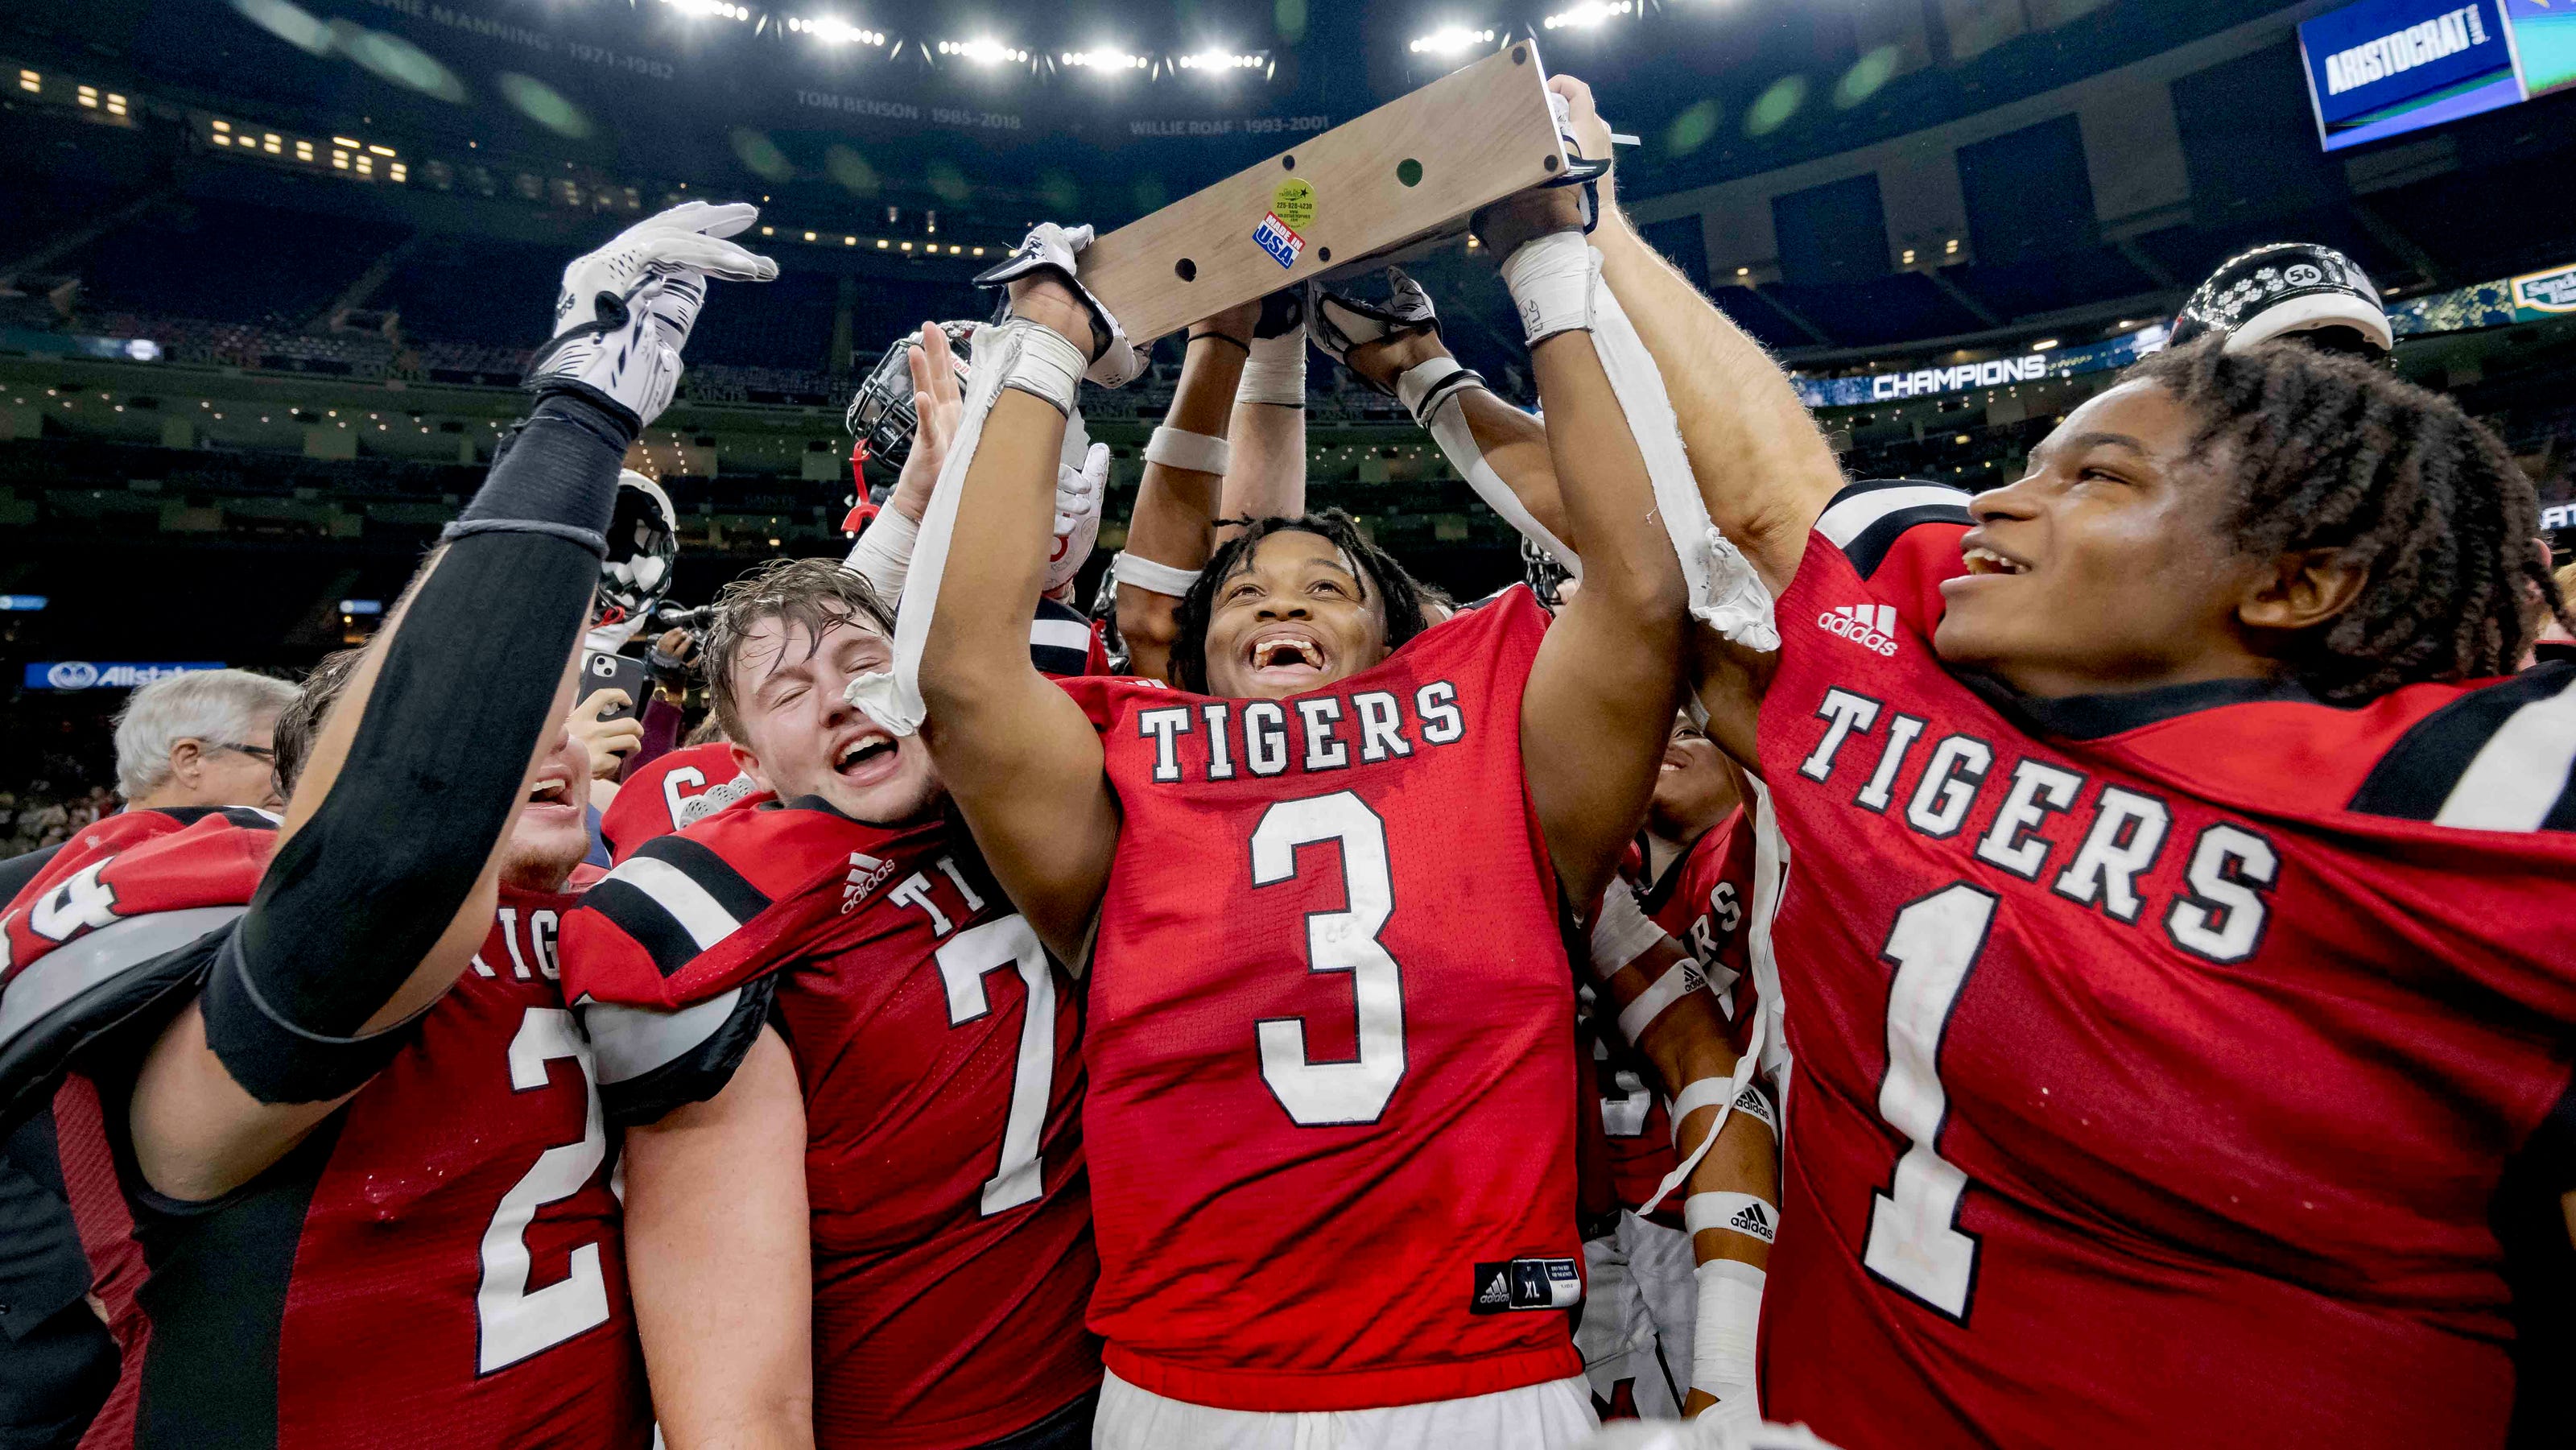 LHSAA basketball playoffs, football format and what might change